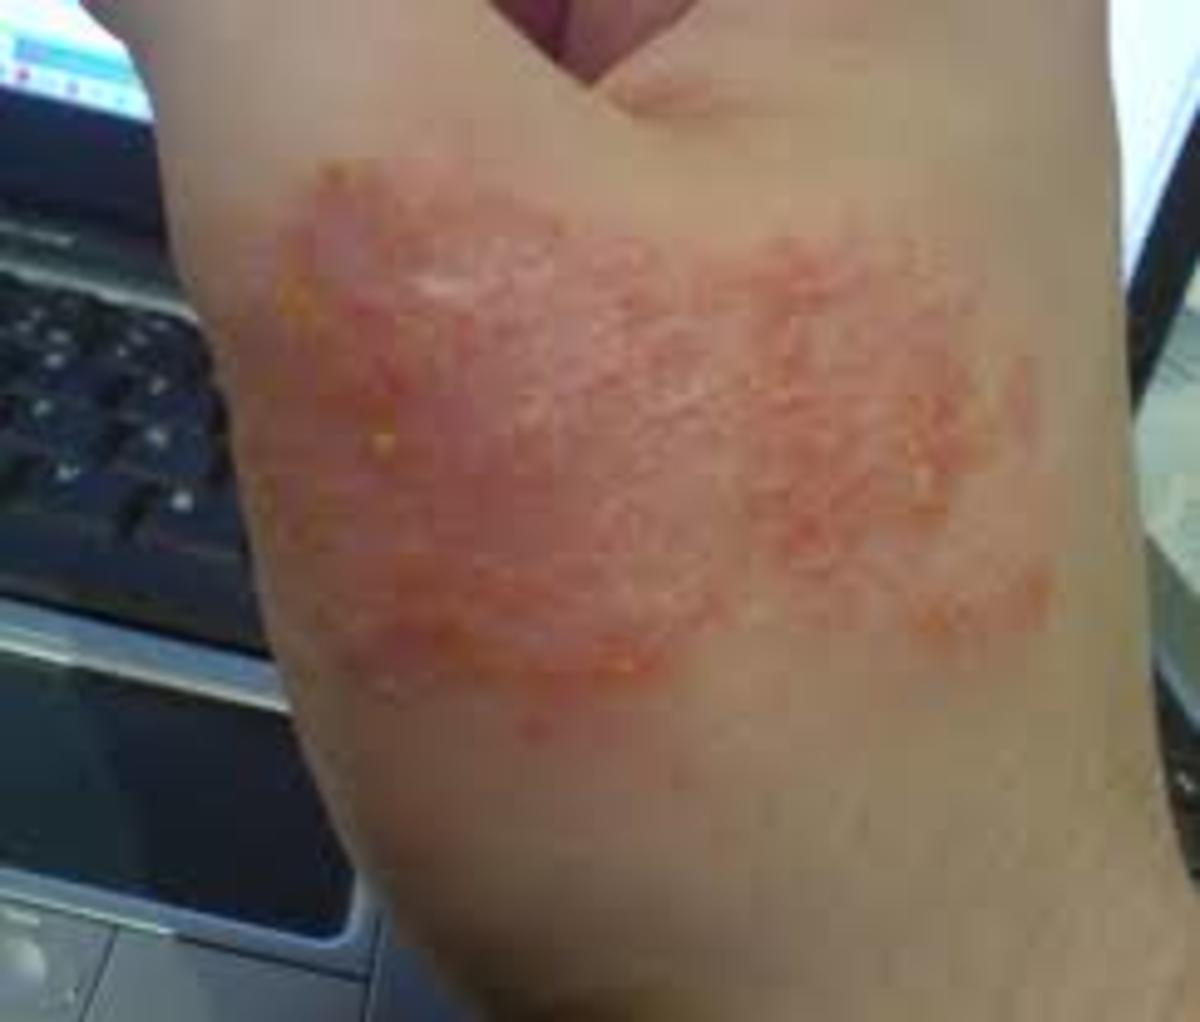 Eczematous rash with bacterial infection 